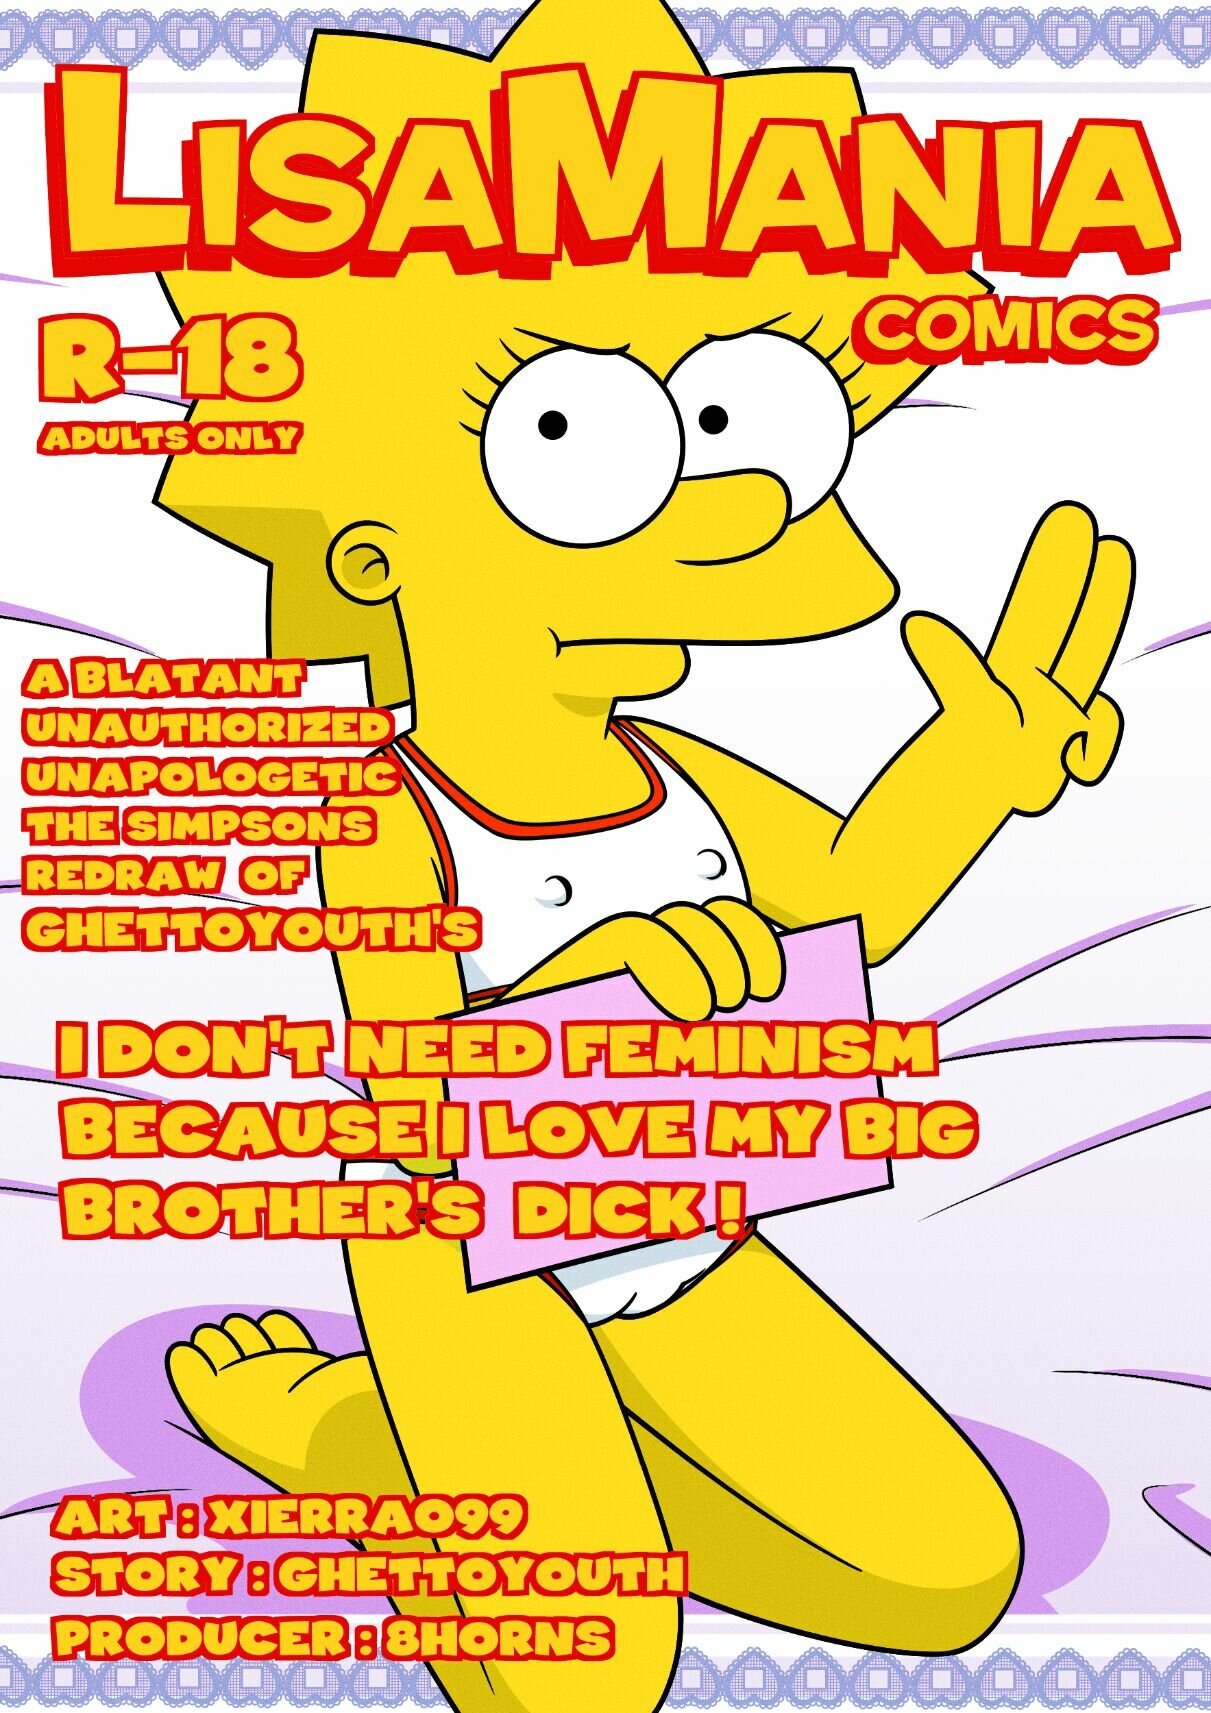 I don't need feminism because I love my big brother's dick version Simpsons - 1